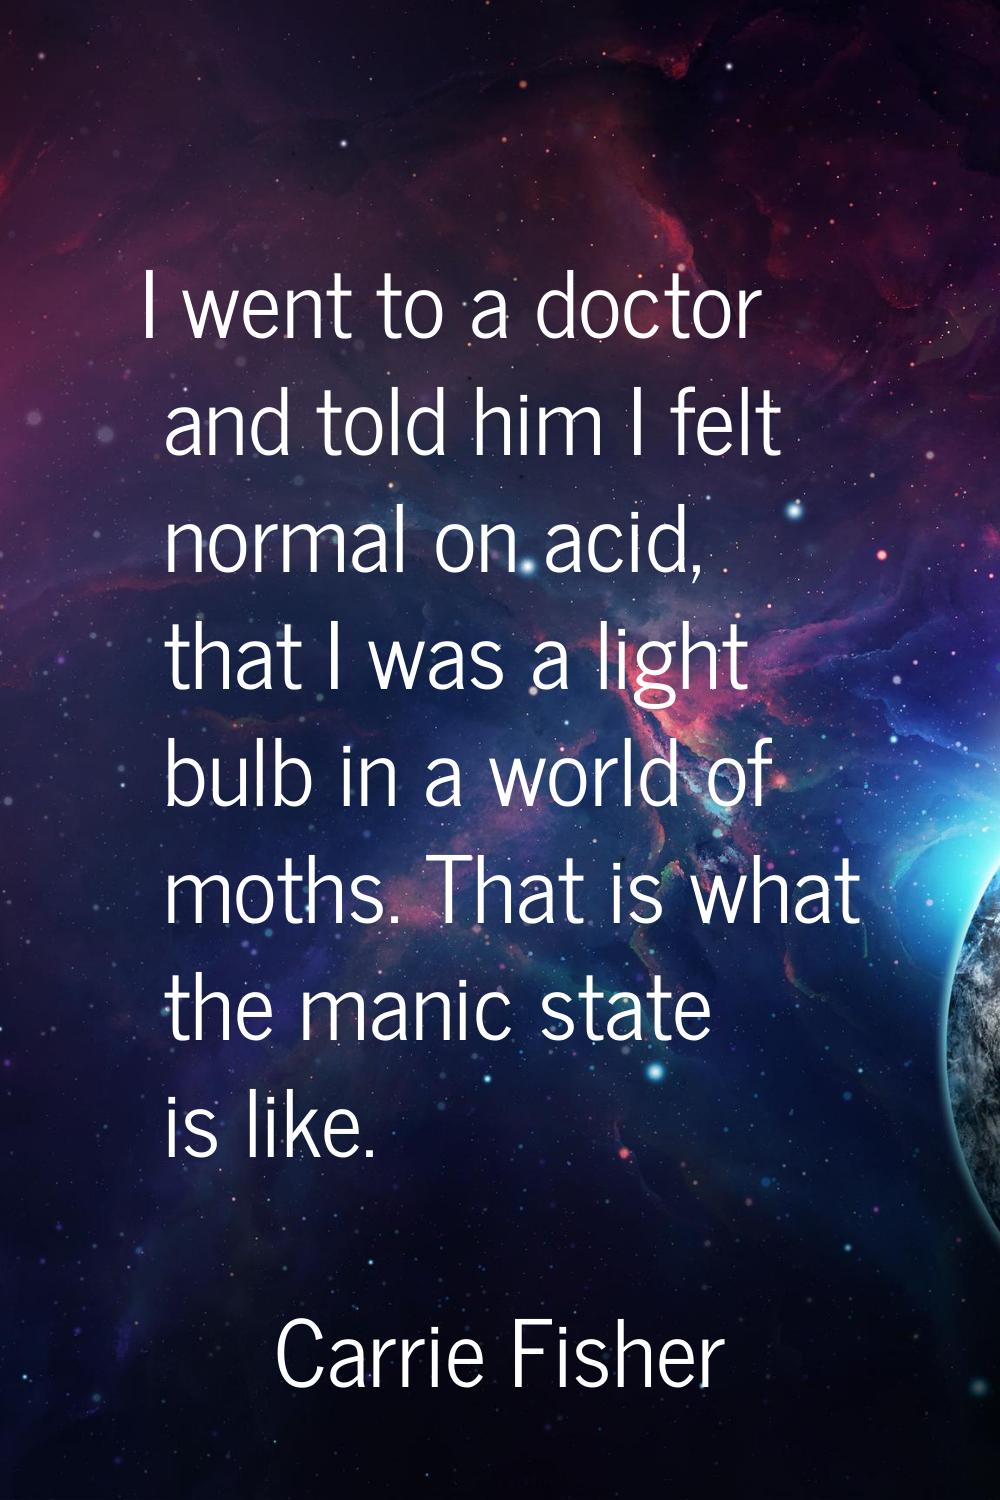 I went to a doctor and told him I felt normal on acid, that I was a light bulb in a world of moths.